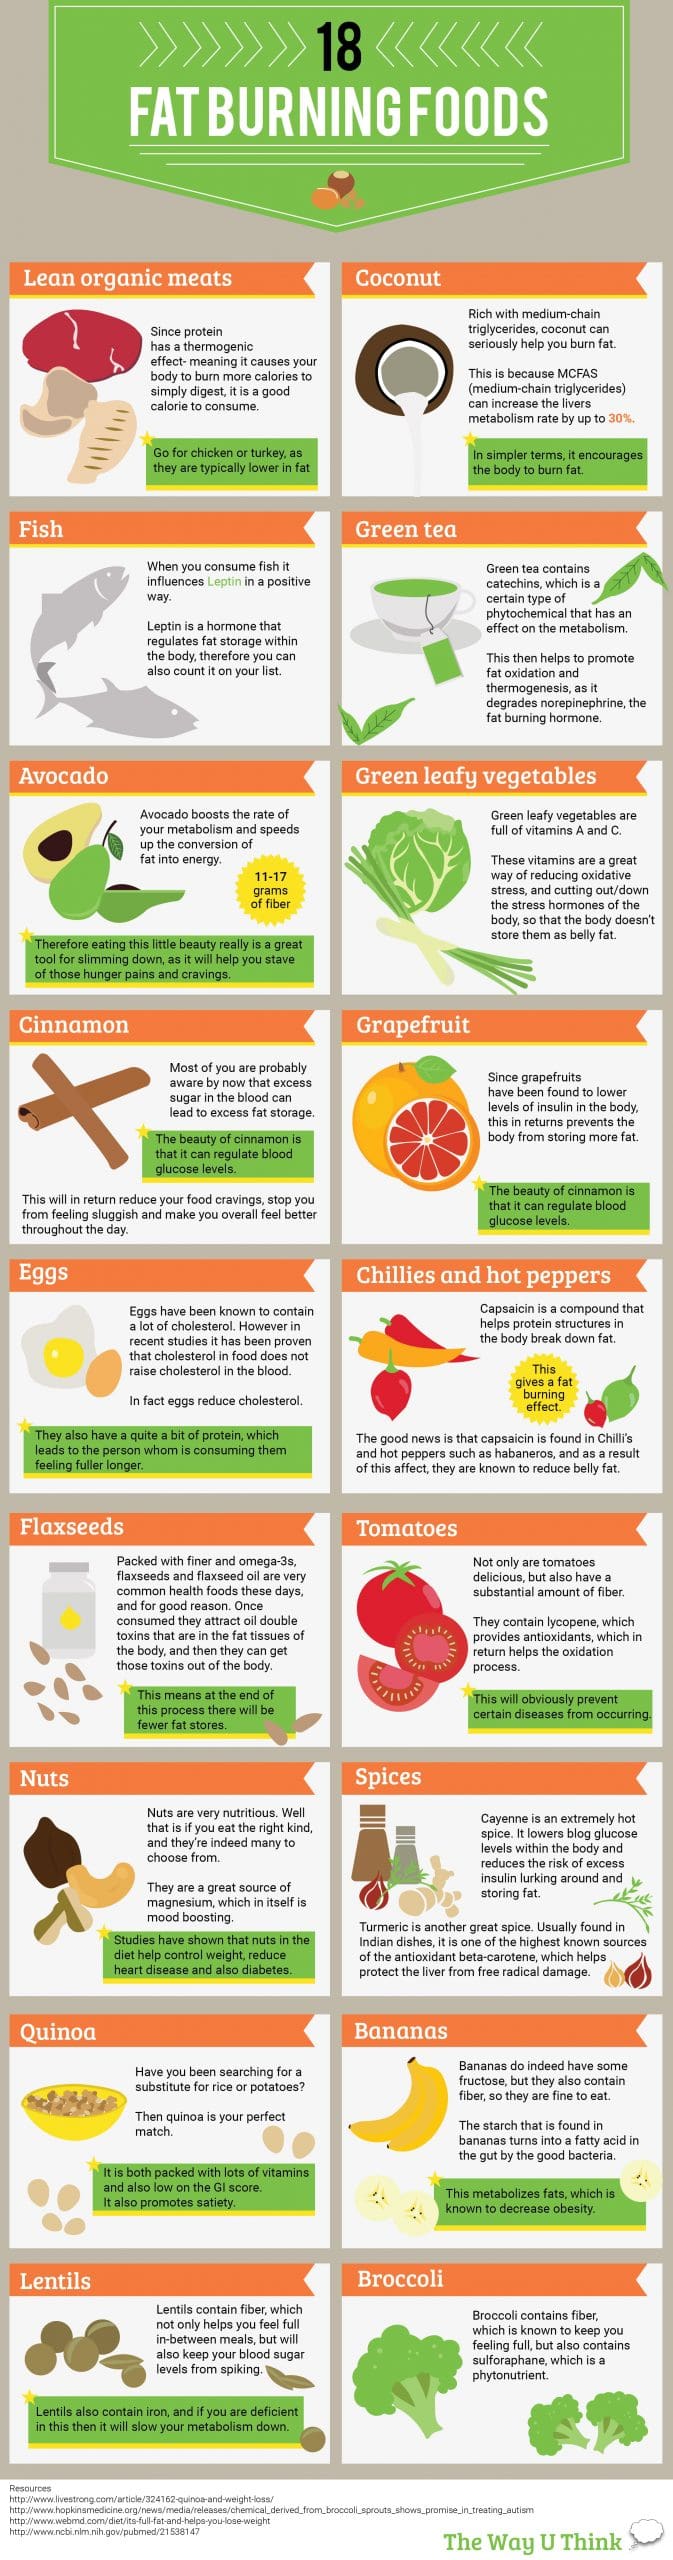 19 FAT BURNING FOODS-01 pic changed